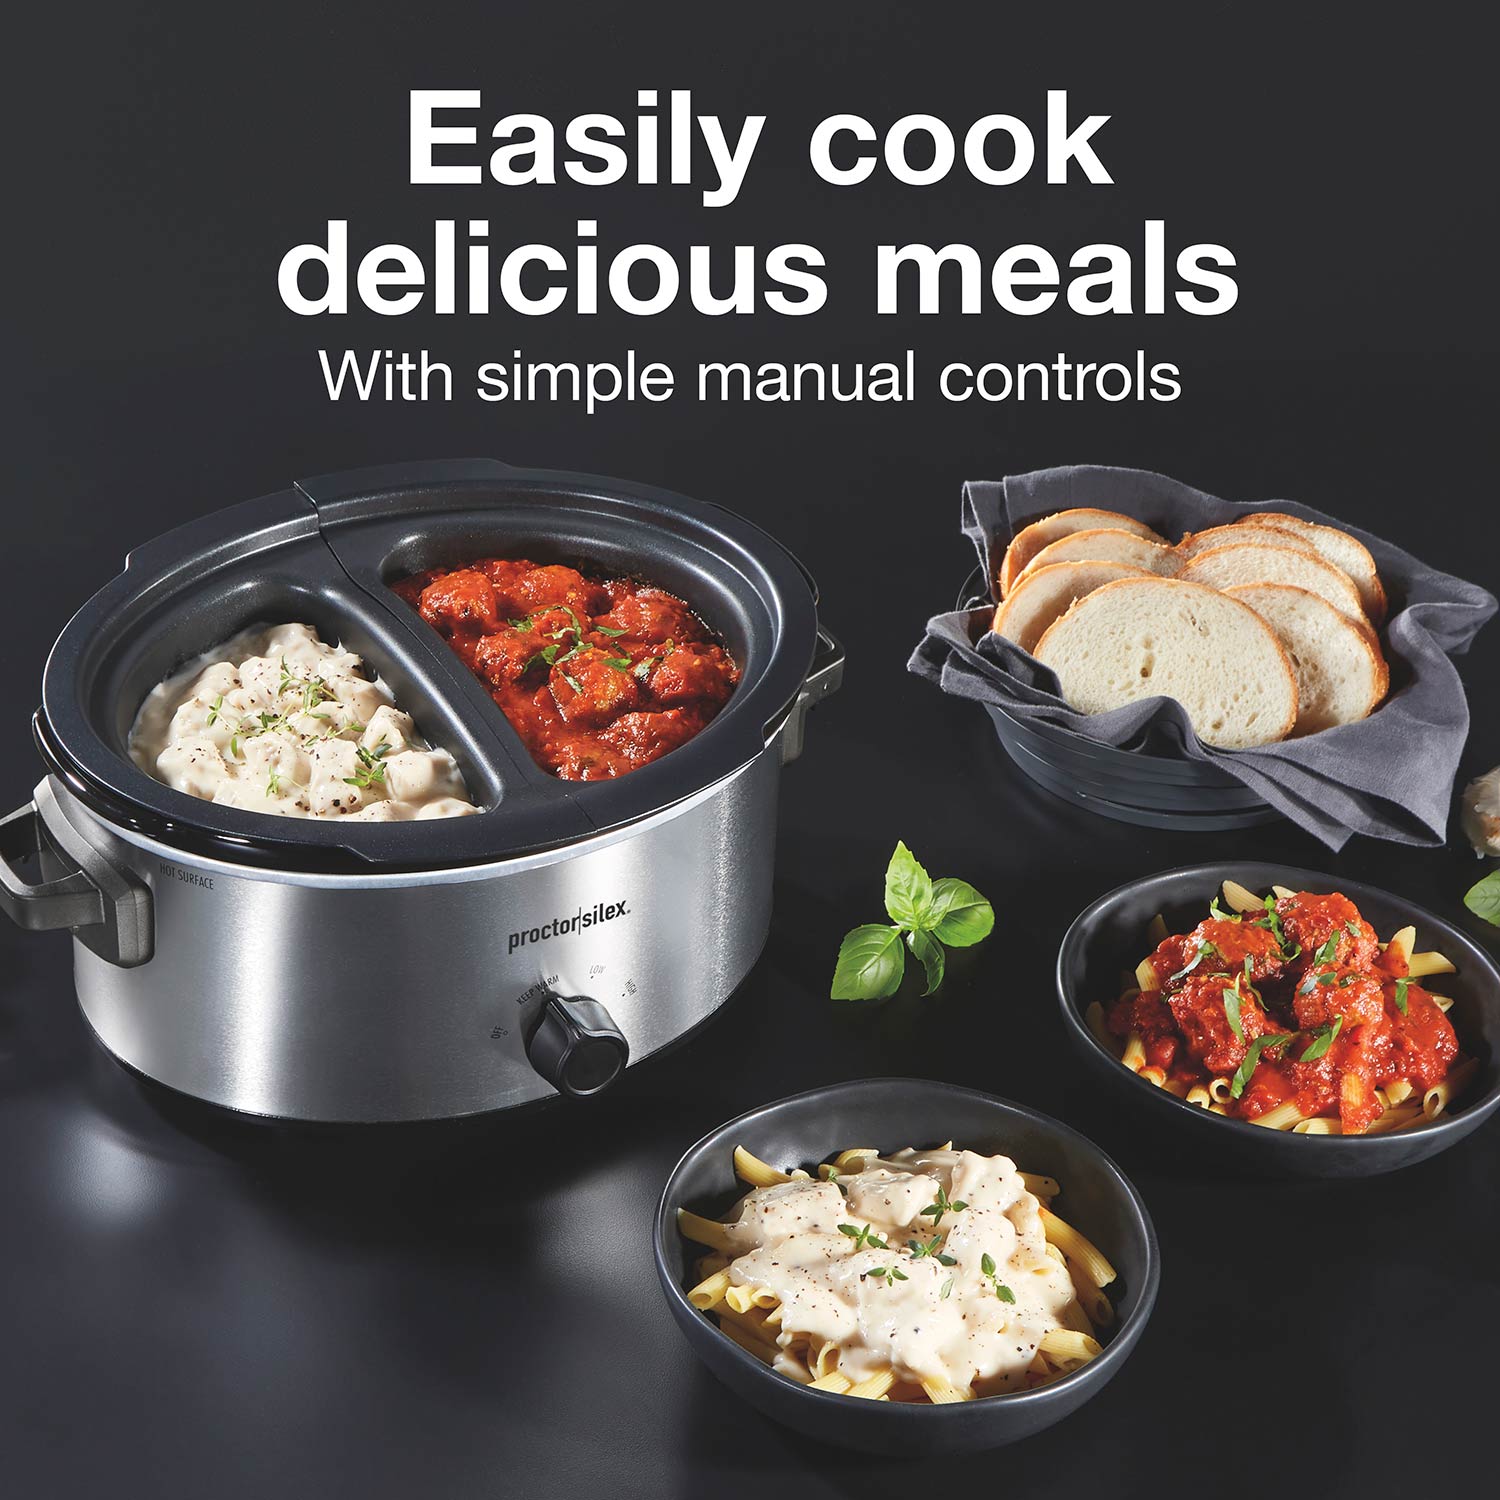 Dual slow cooker cooks up new recipe ideas